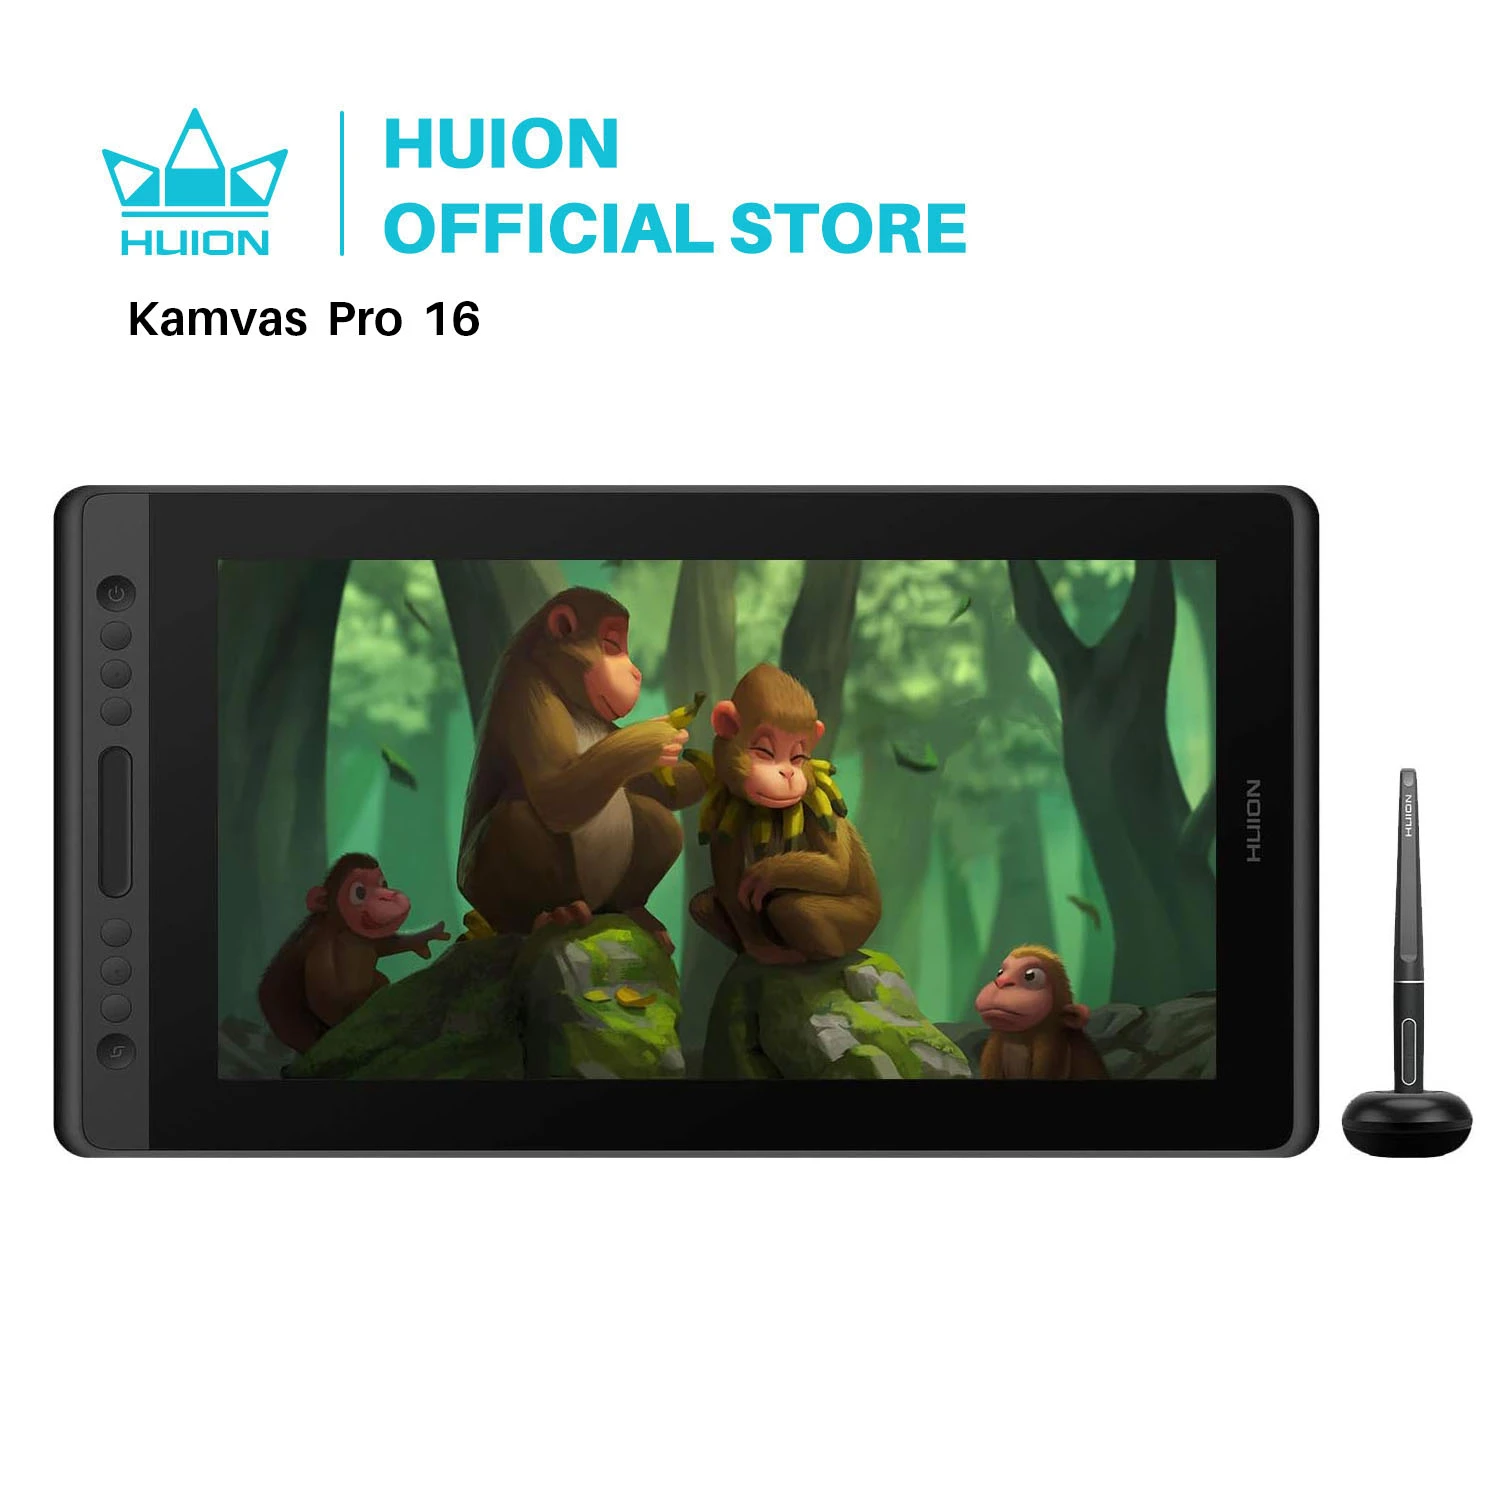 Huion Graphic Monitor Kamvas Pro 16 Drawing Tablet Screen 15.6 Inch Digital Tablets Draw Display with Battery-free Stylus Pen